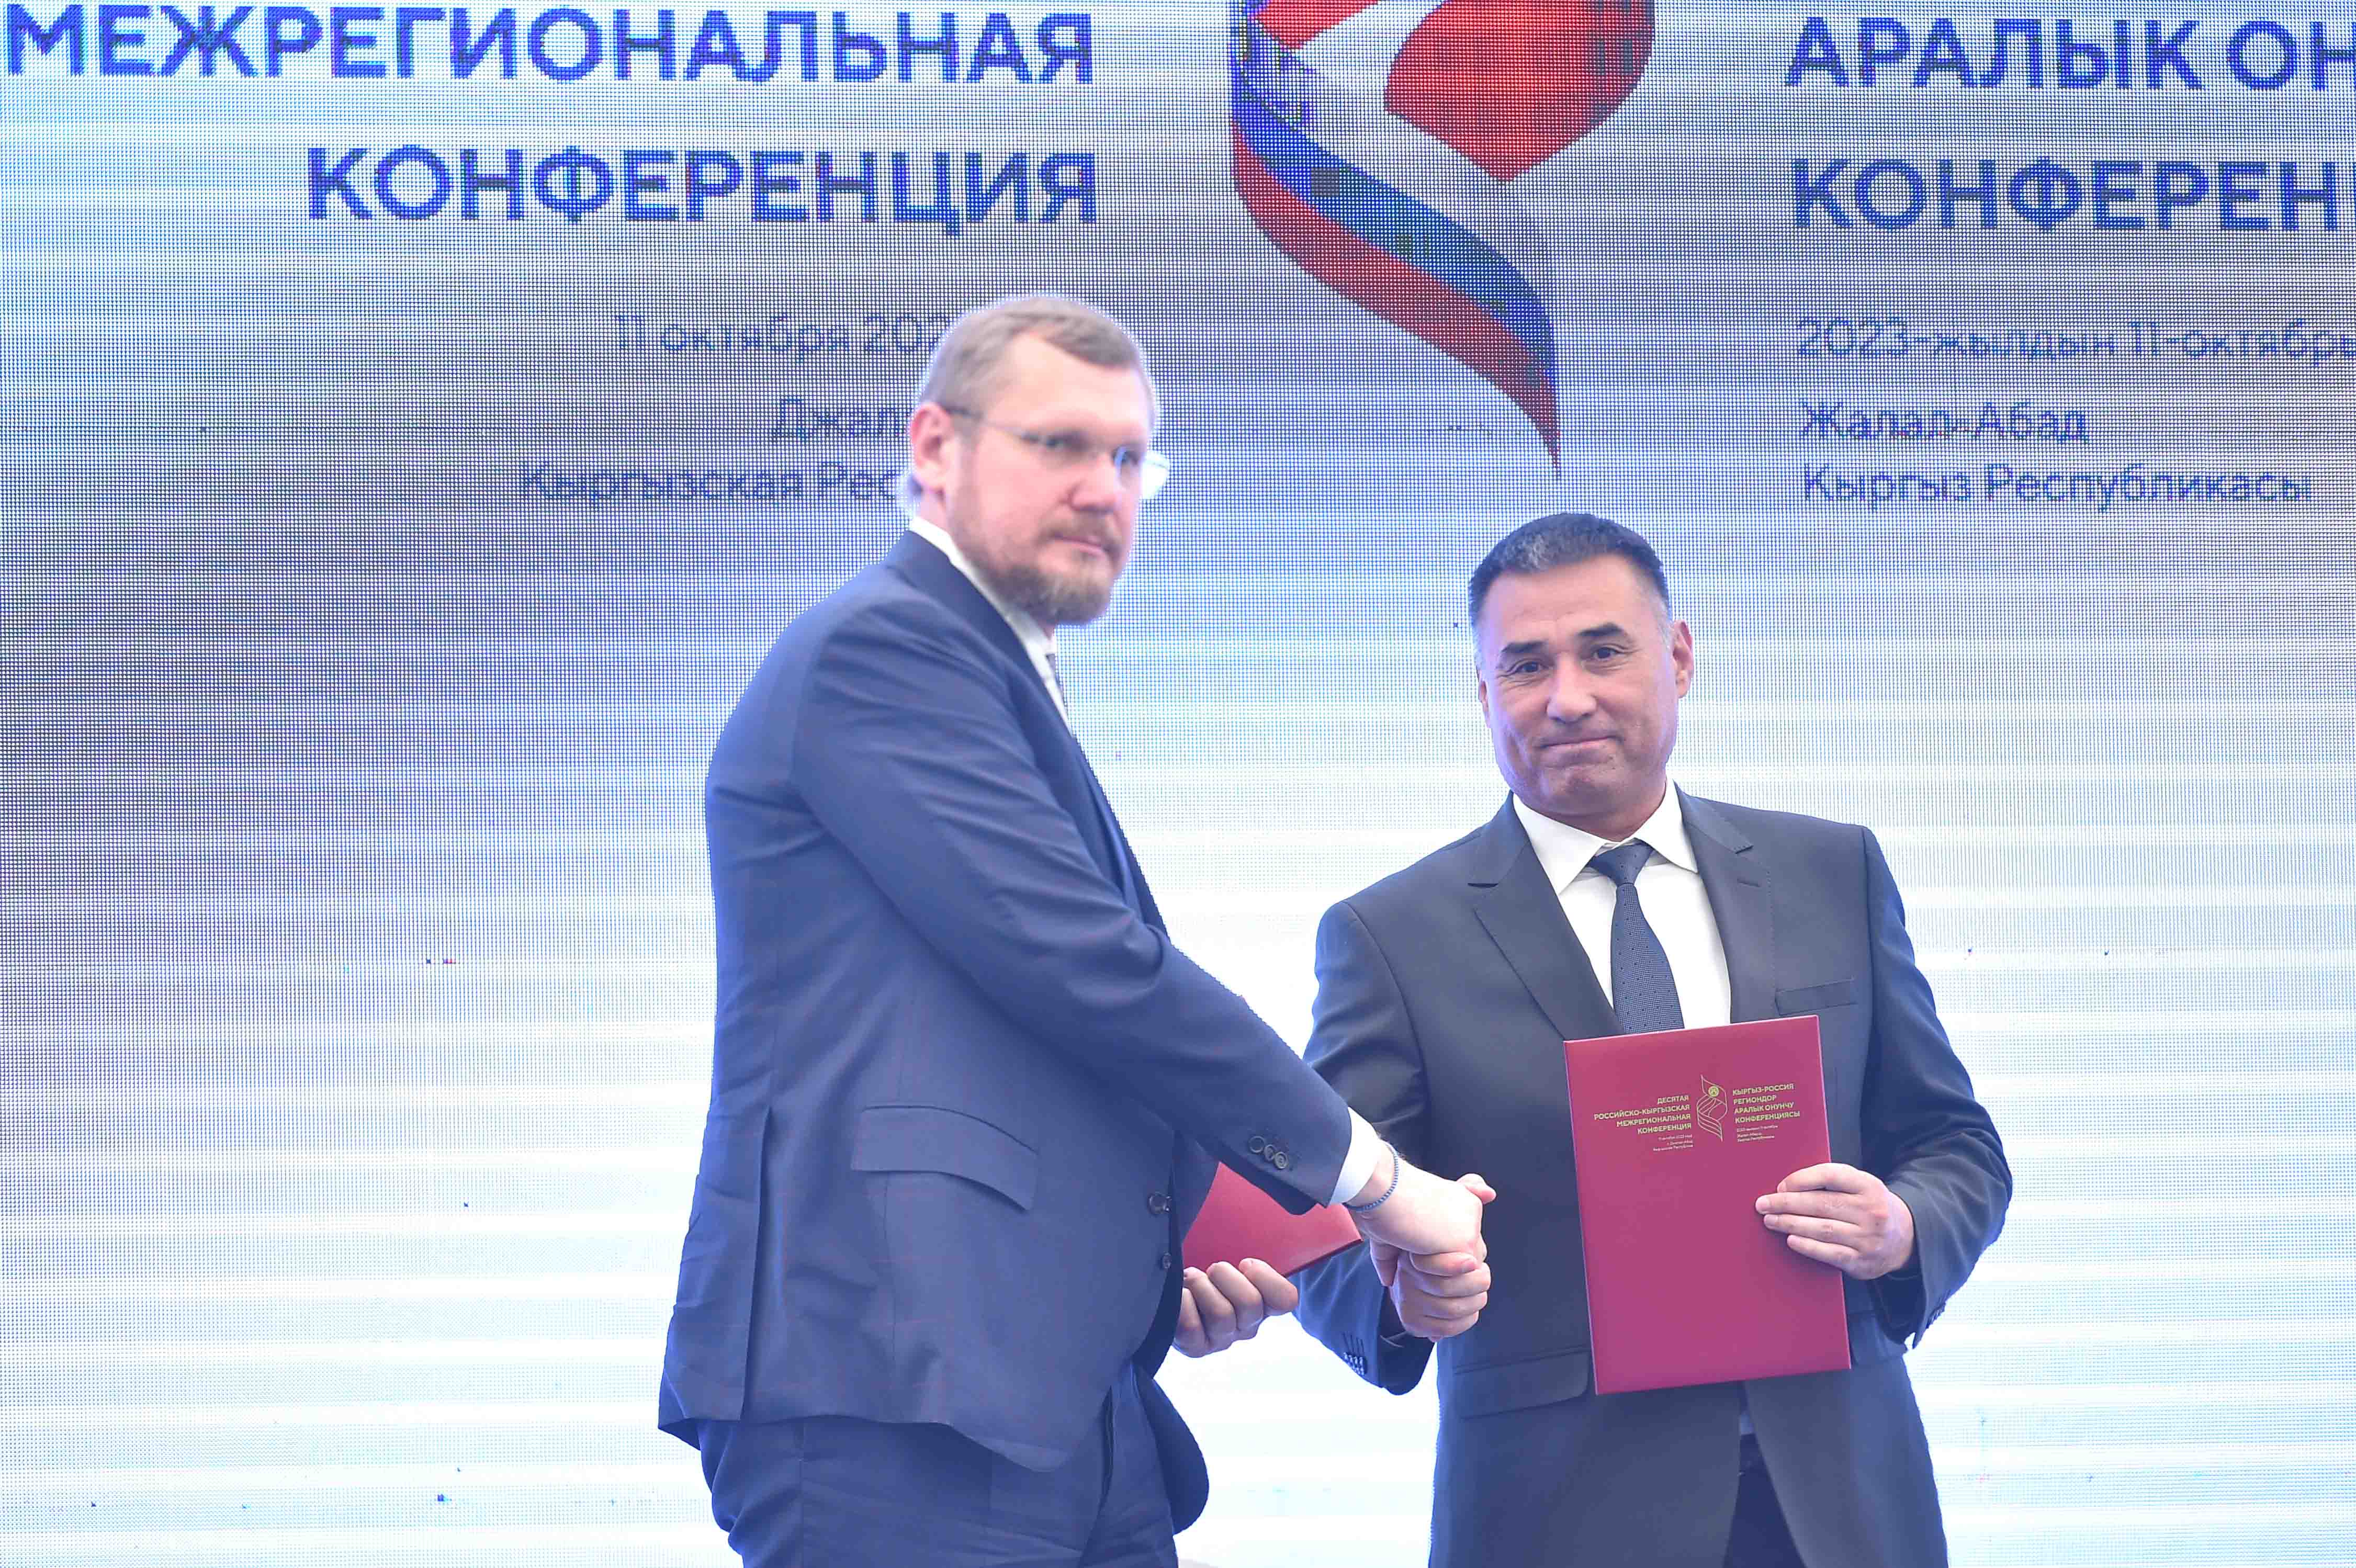 10th-anniversary Kyrgyz-Russian conference yields $3.5bn in economic agreements, strengthening bilateral ties 